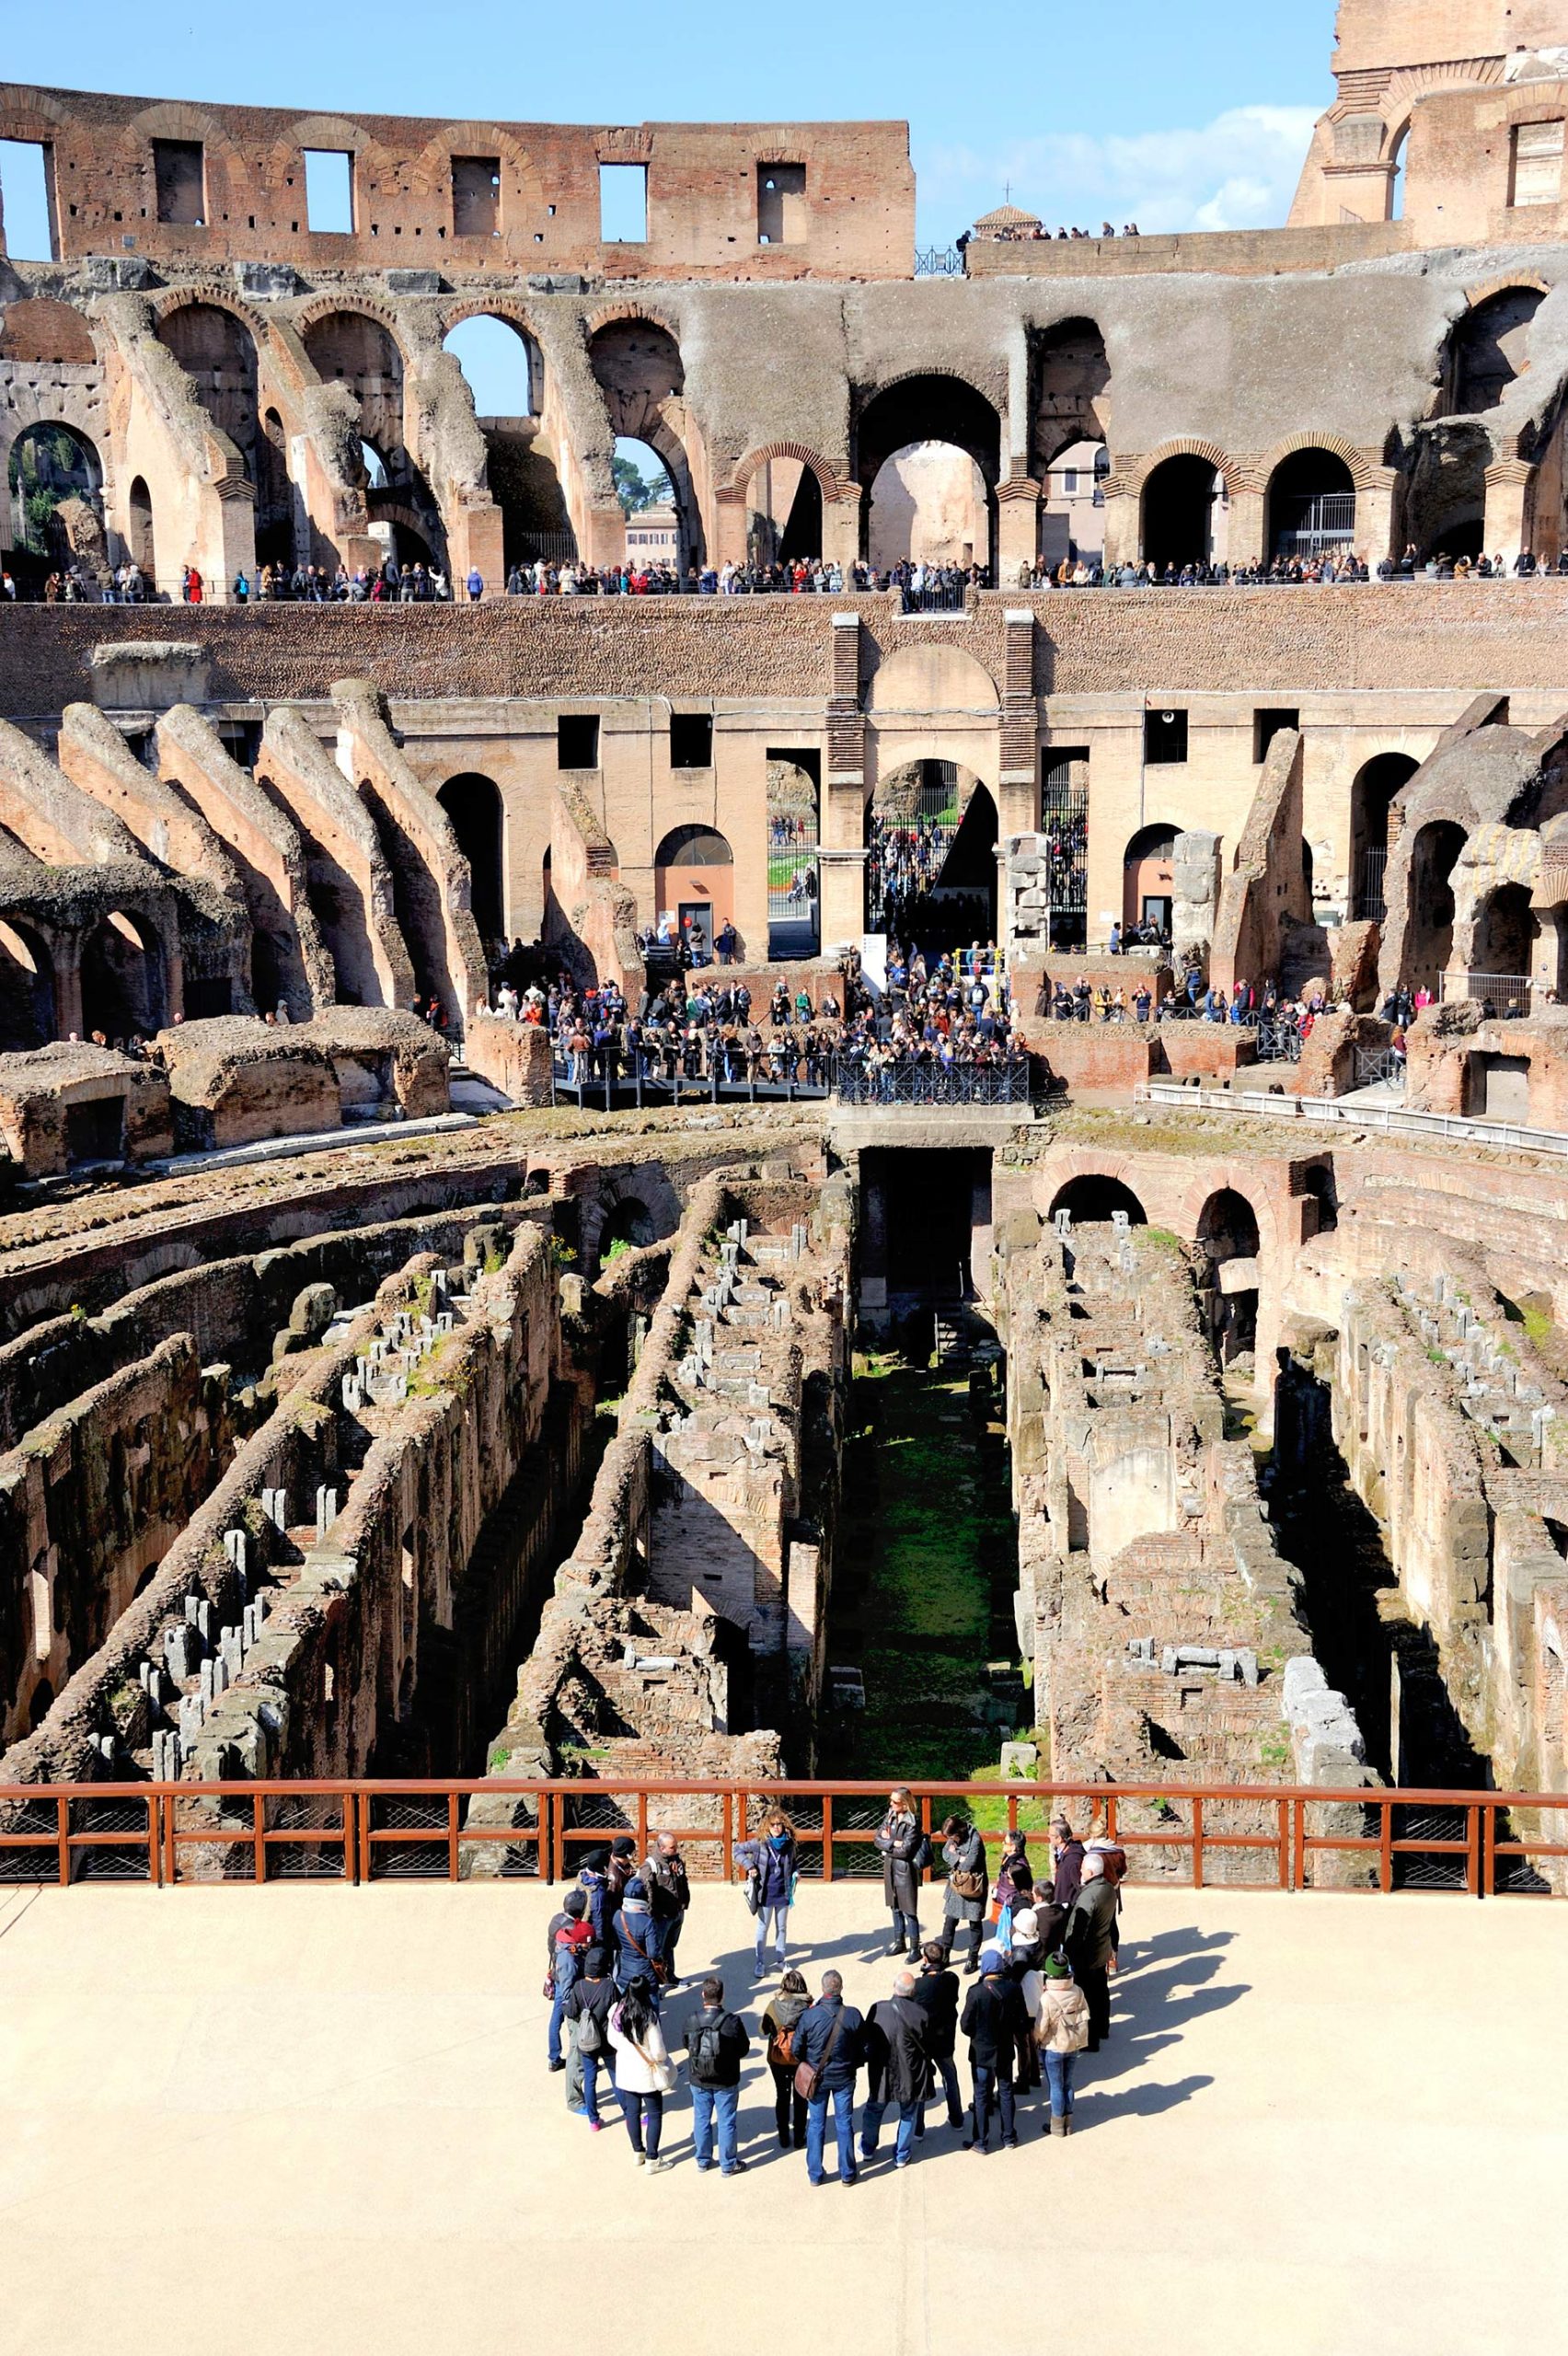 Tourists Inside the Colosseum – Rome, Italy